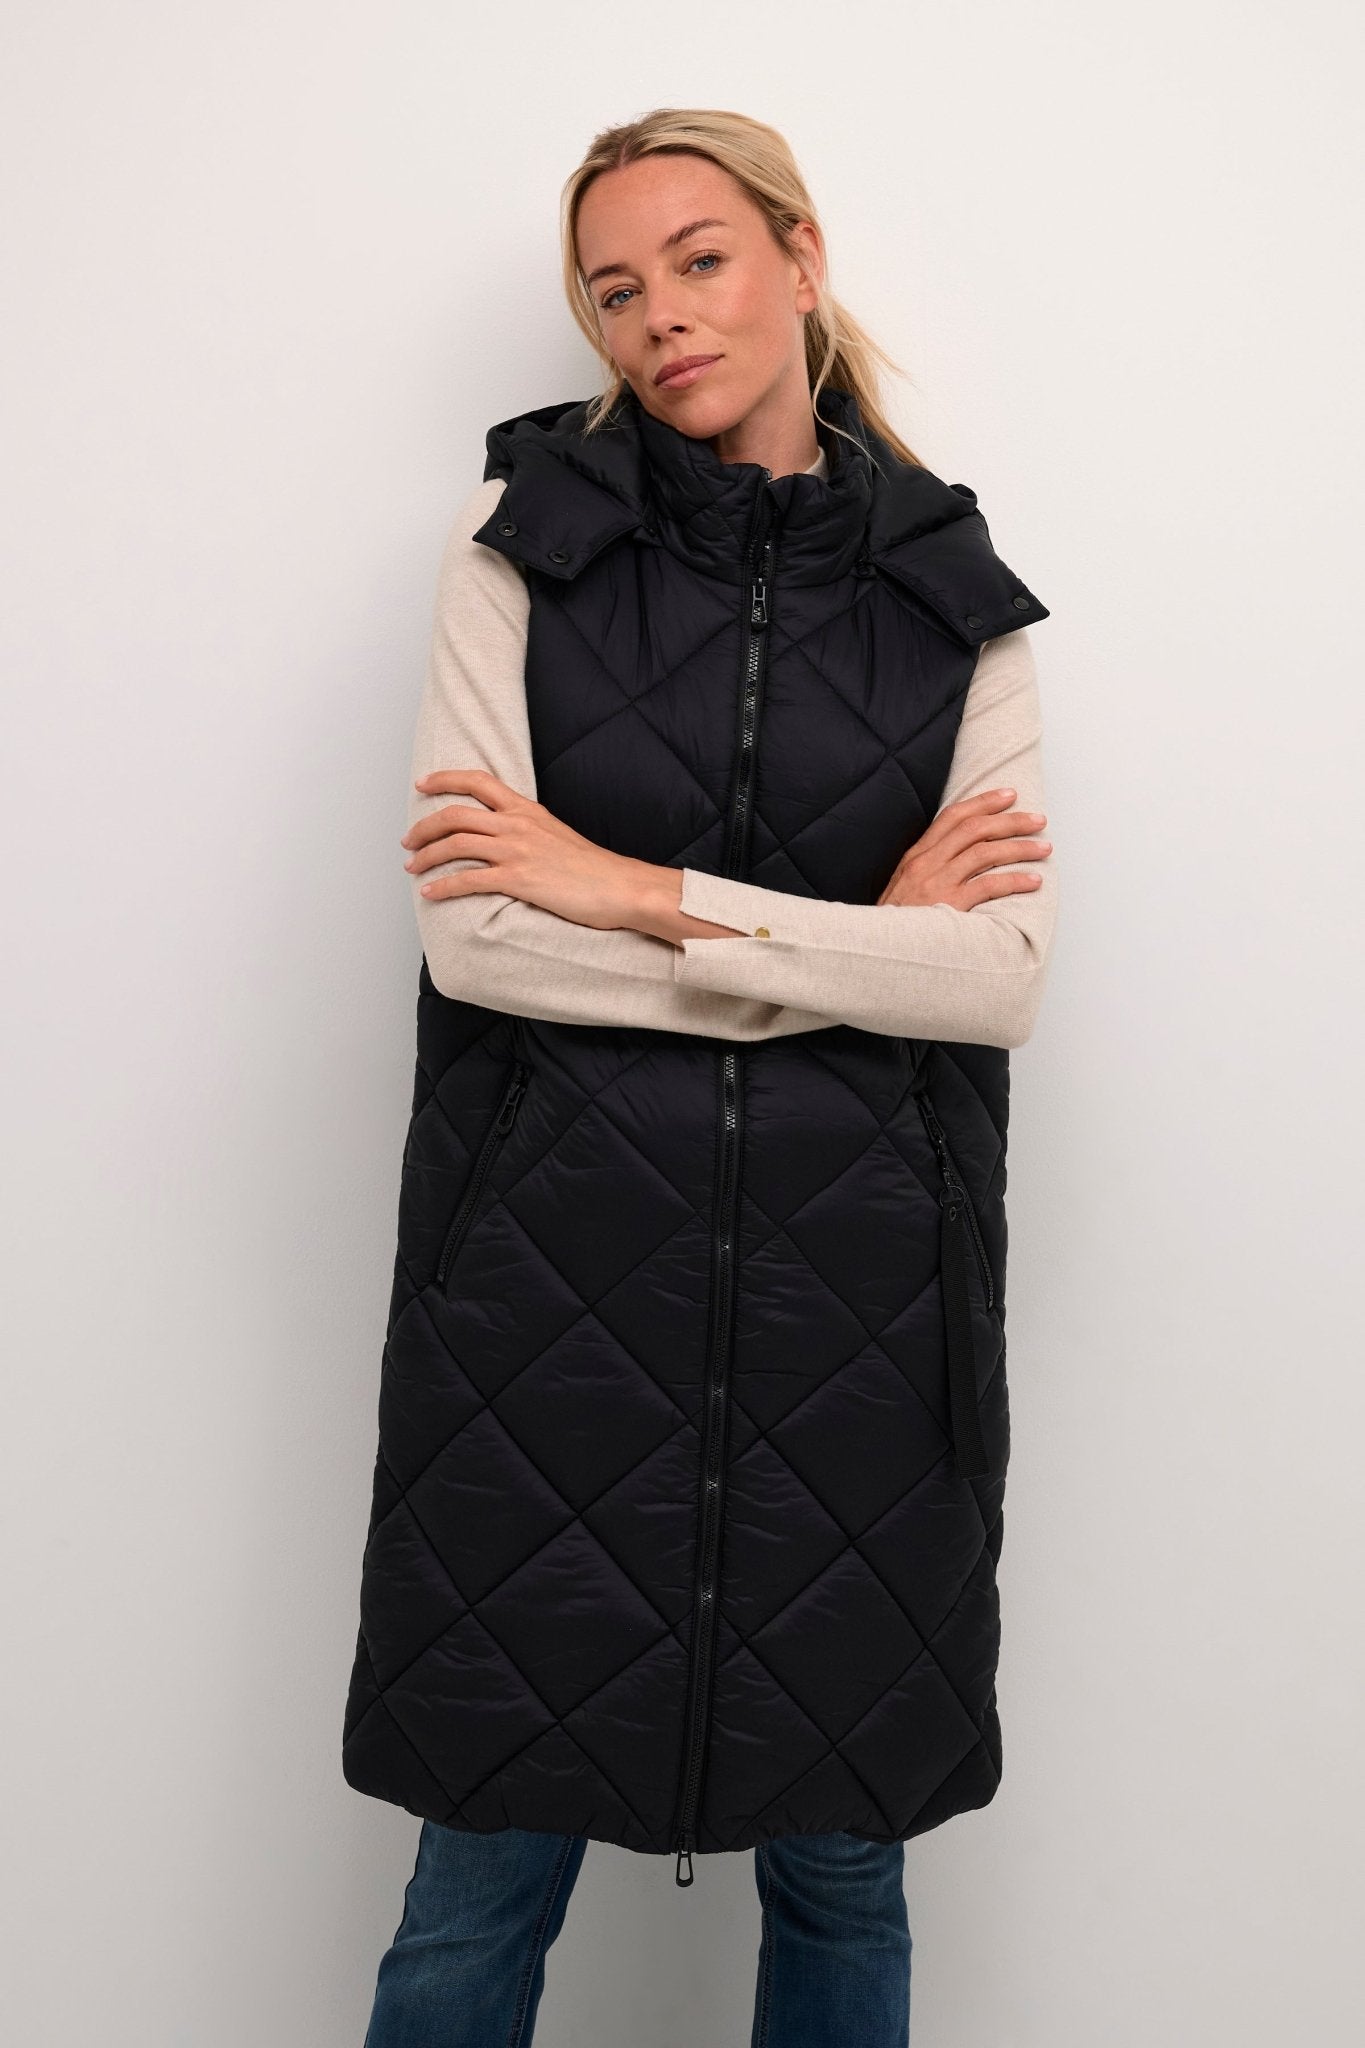 Gaiagro long quilted vest - pitch black - Blue Sky Clothing & Lingerie